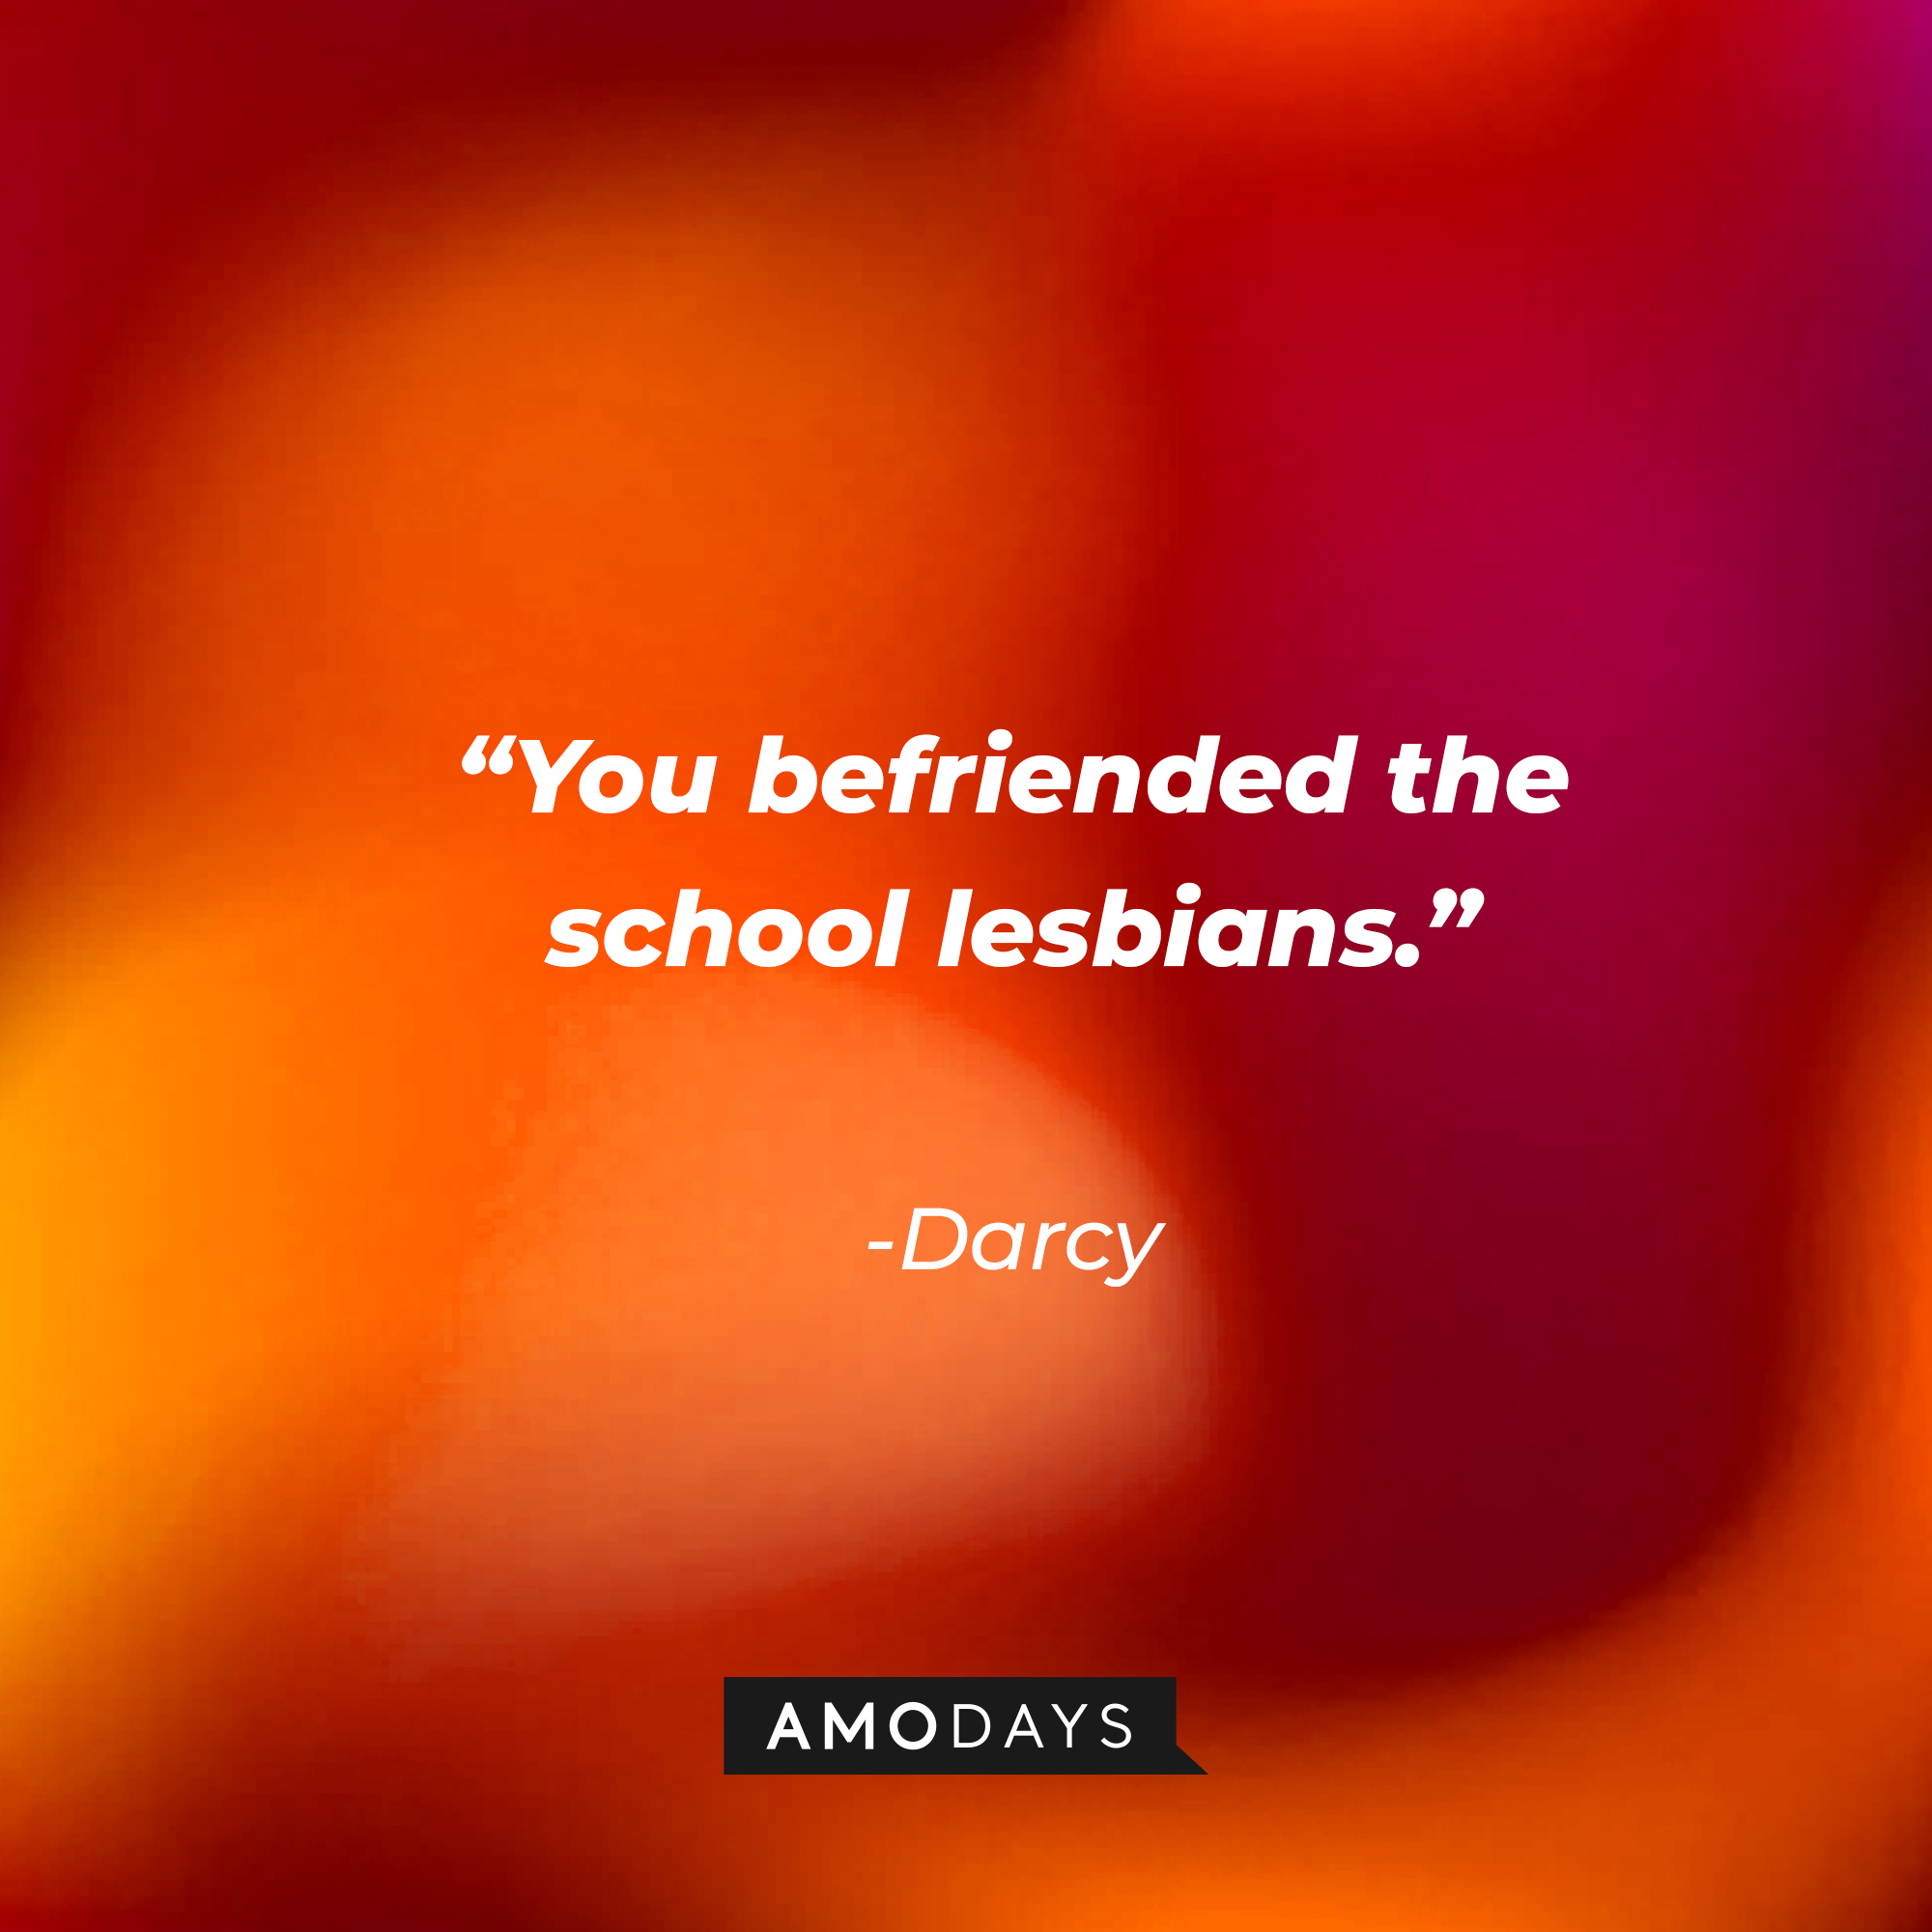 Darcy’s quote: “You befriended the school lesbians.”| Source: AmoDays